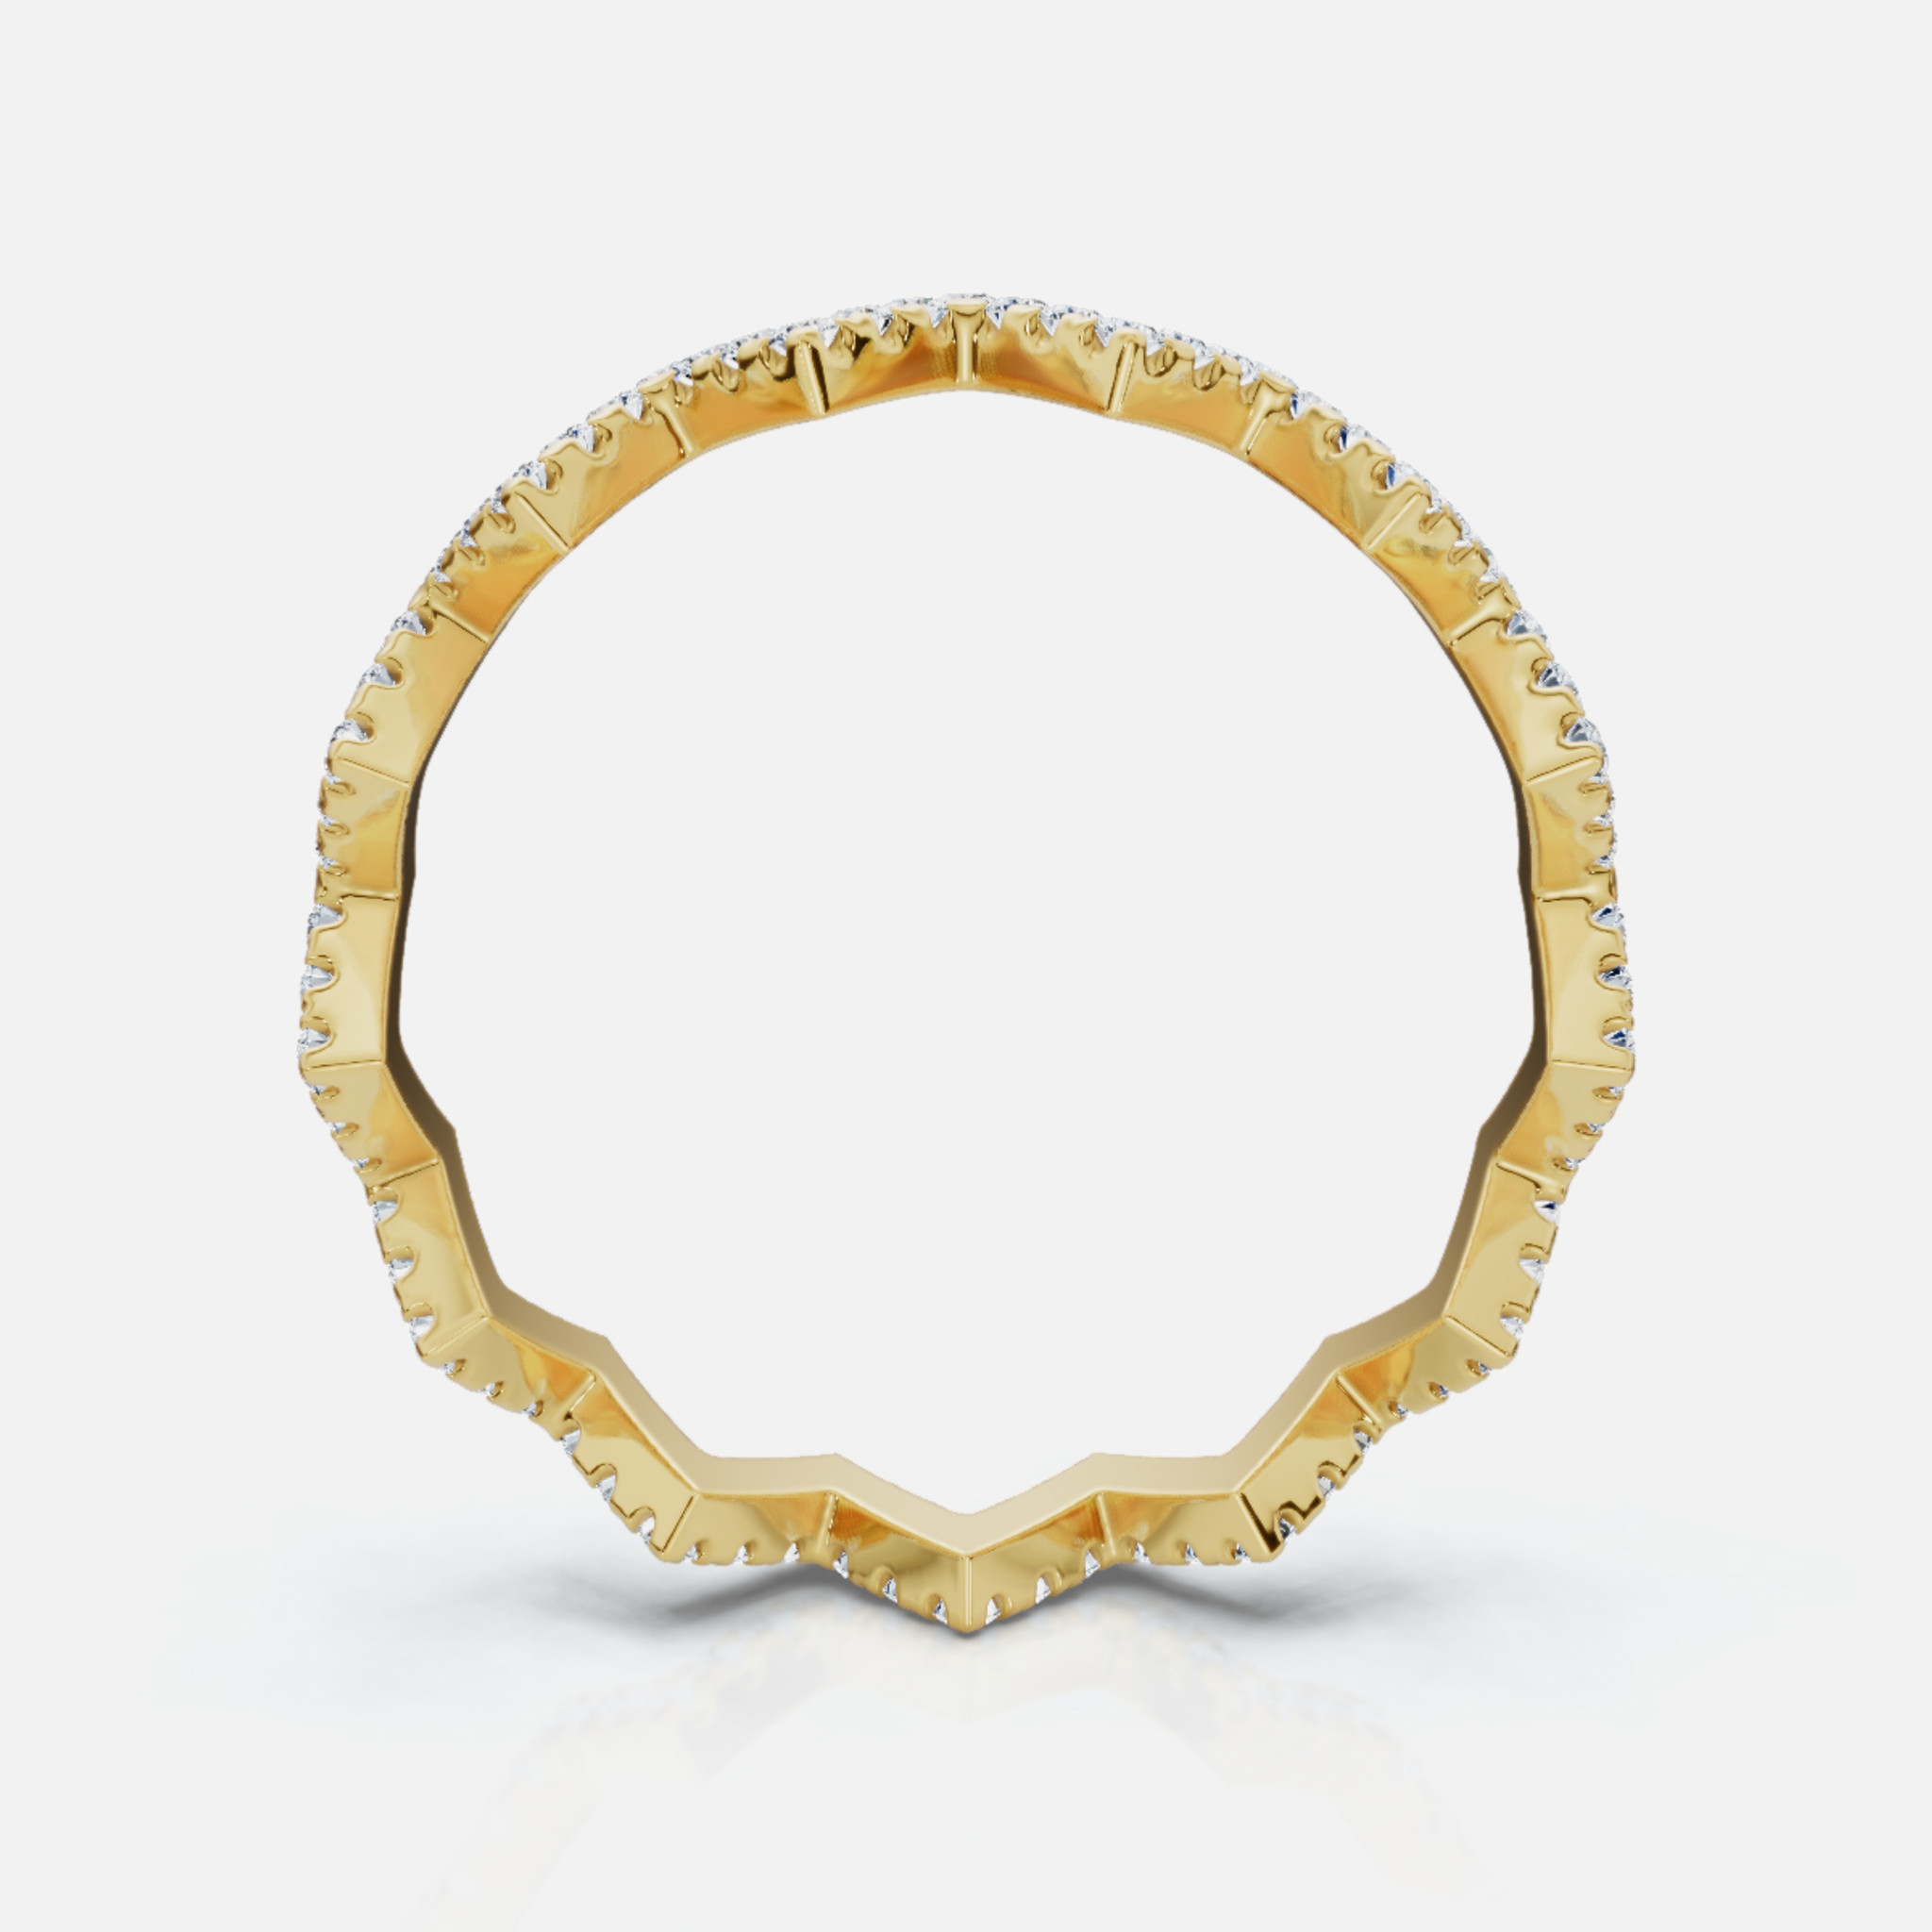 View facing the front of a 14k Gold Zig Zag Diamond Ring